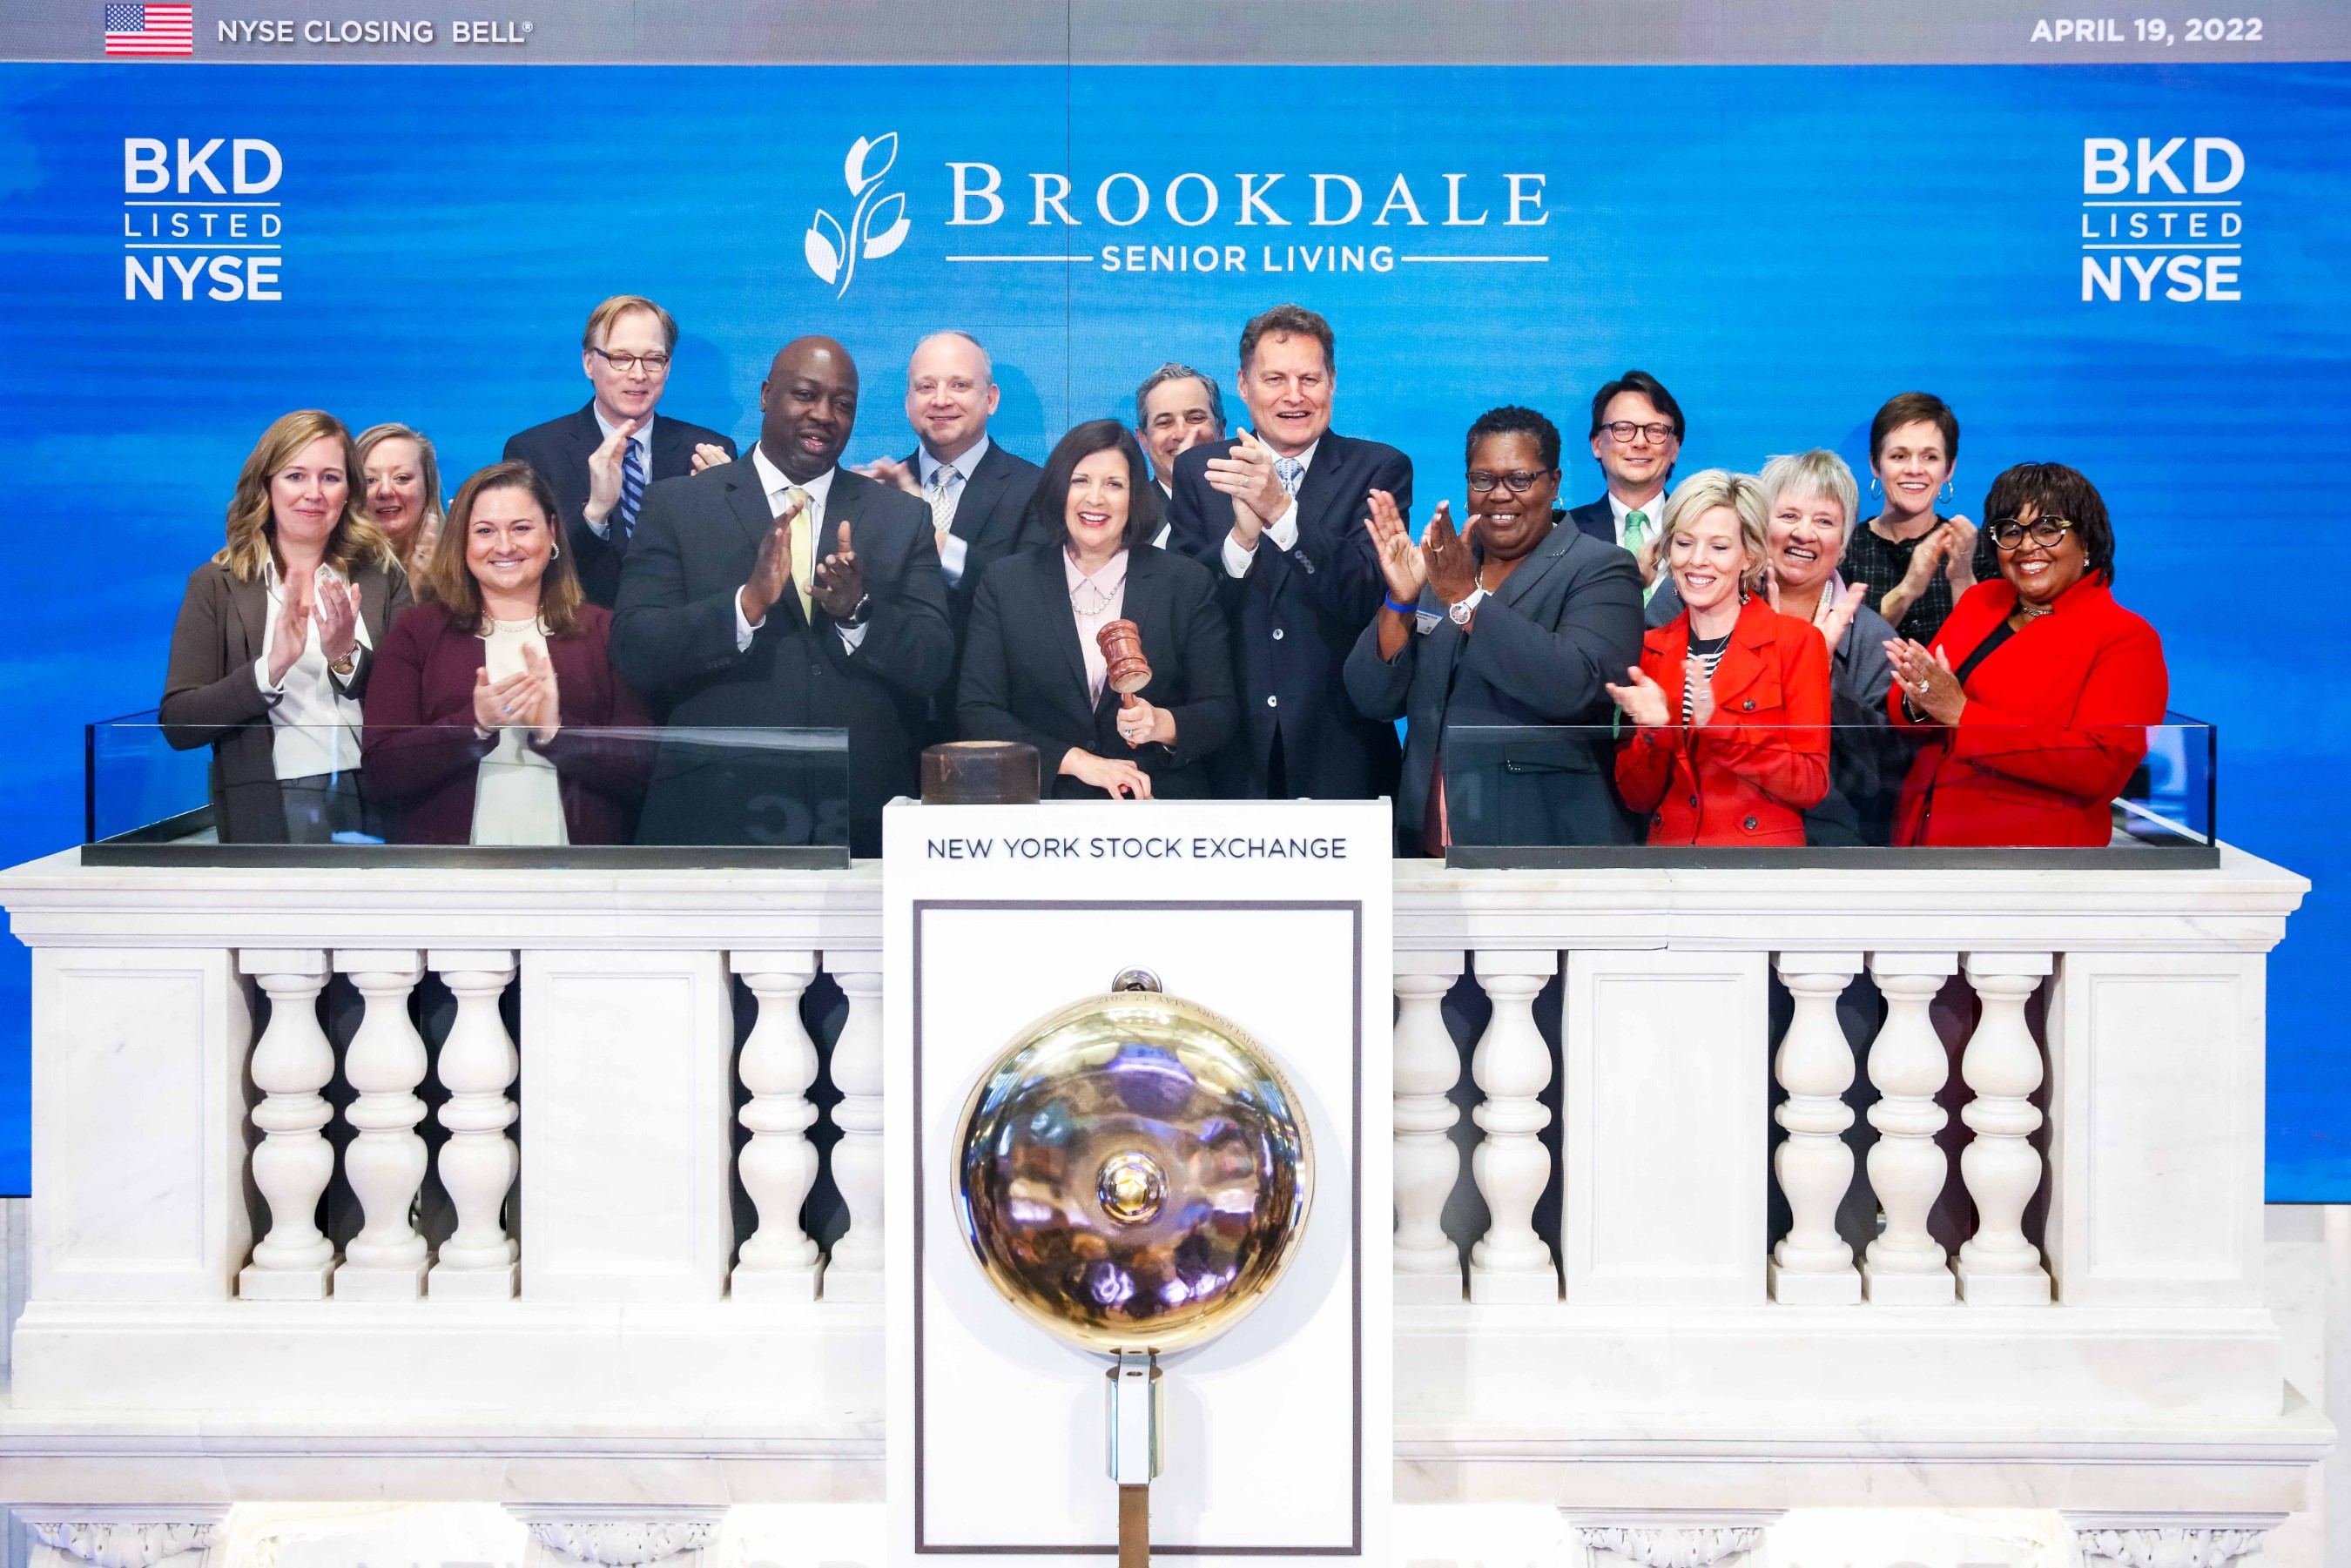 Baier, along with several Brookdale heroes, celebrated the digital release of the book by ringing the closing bell at the NYSE.